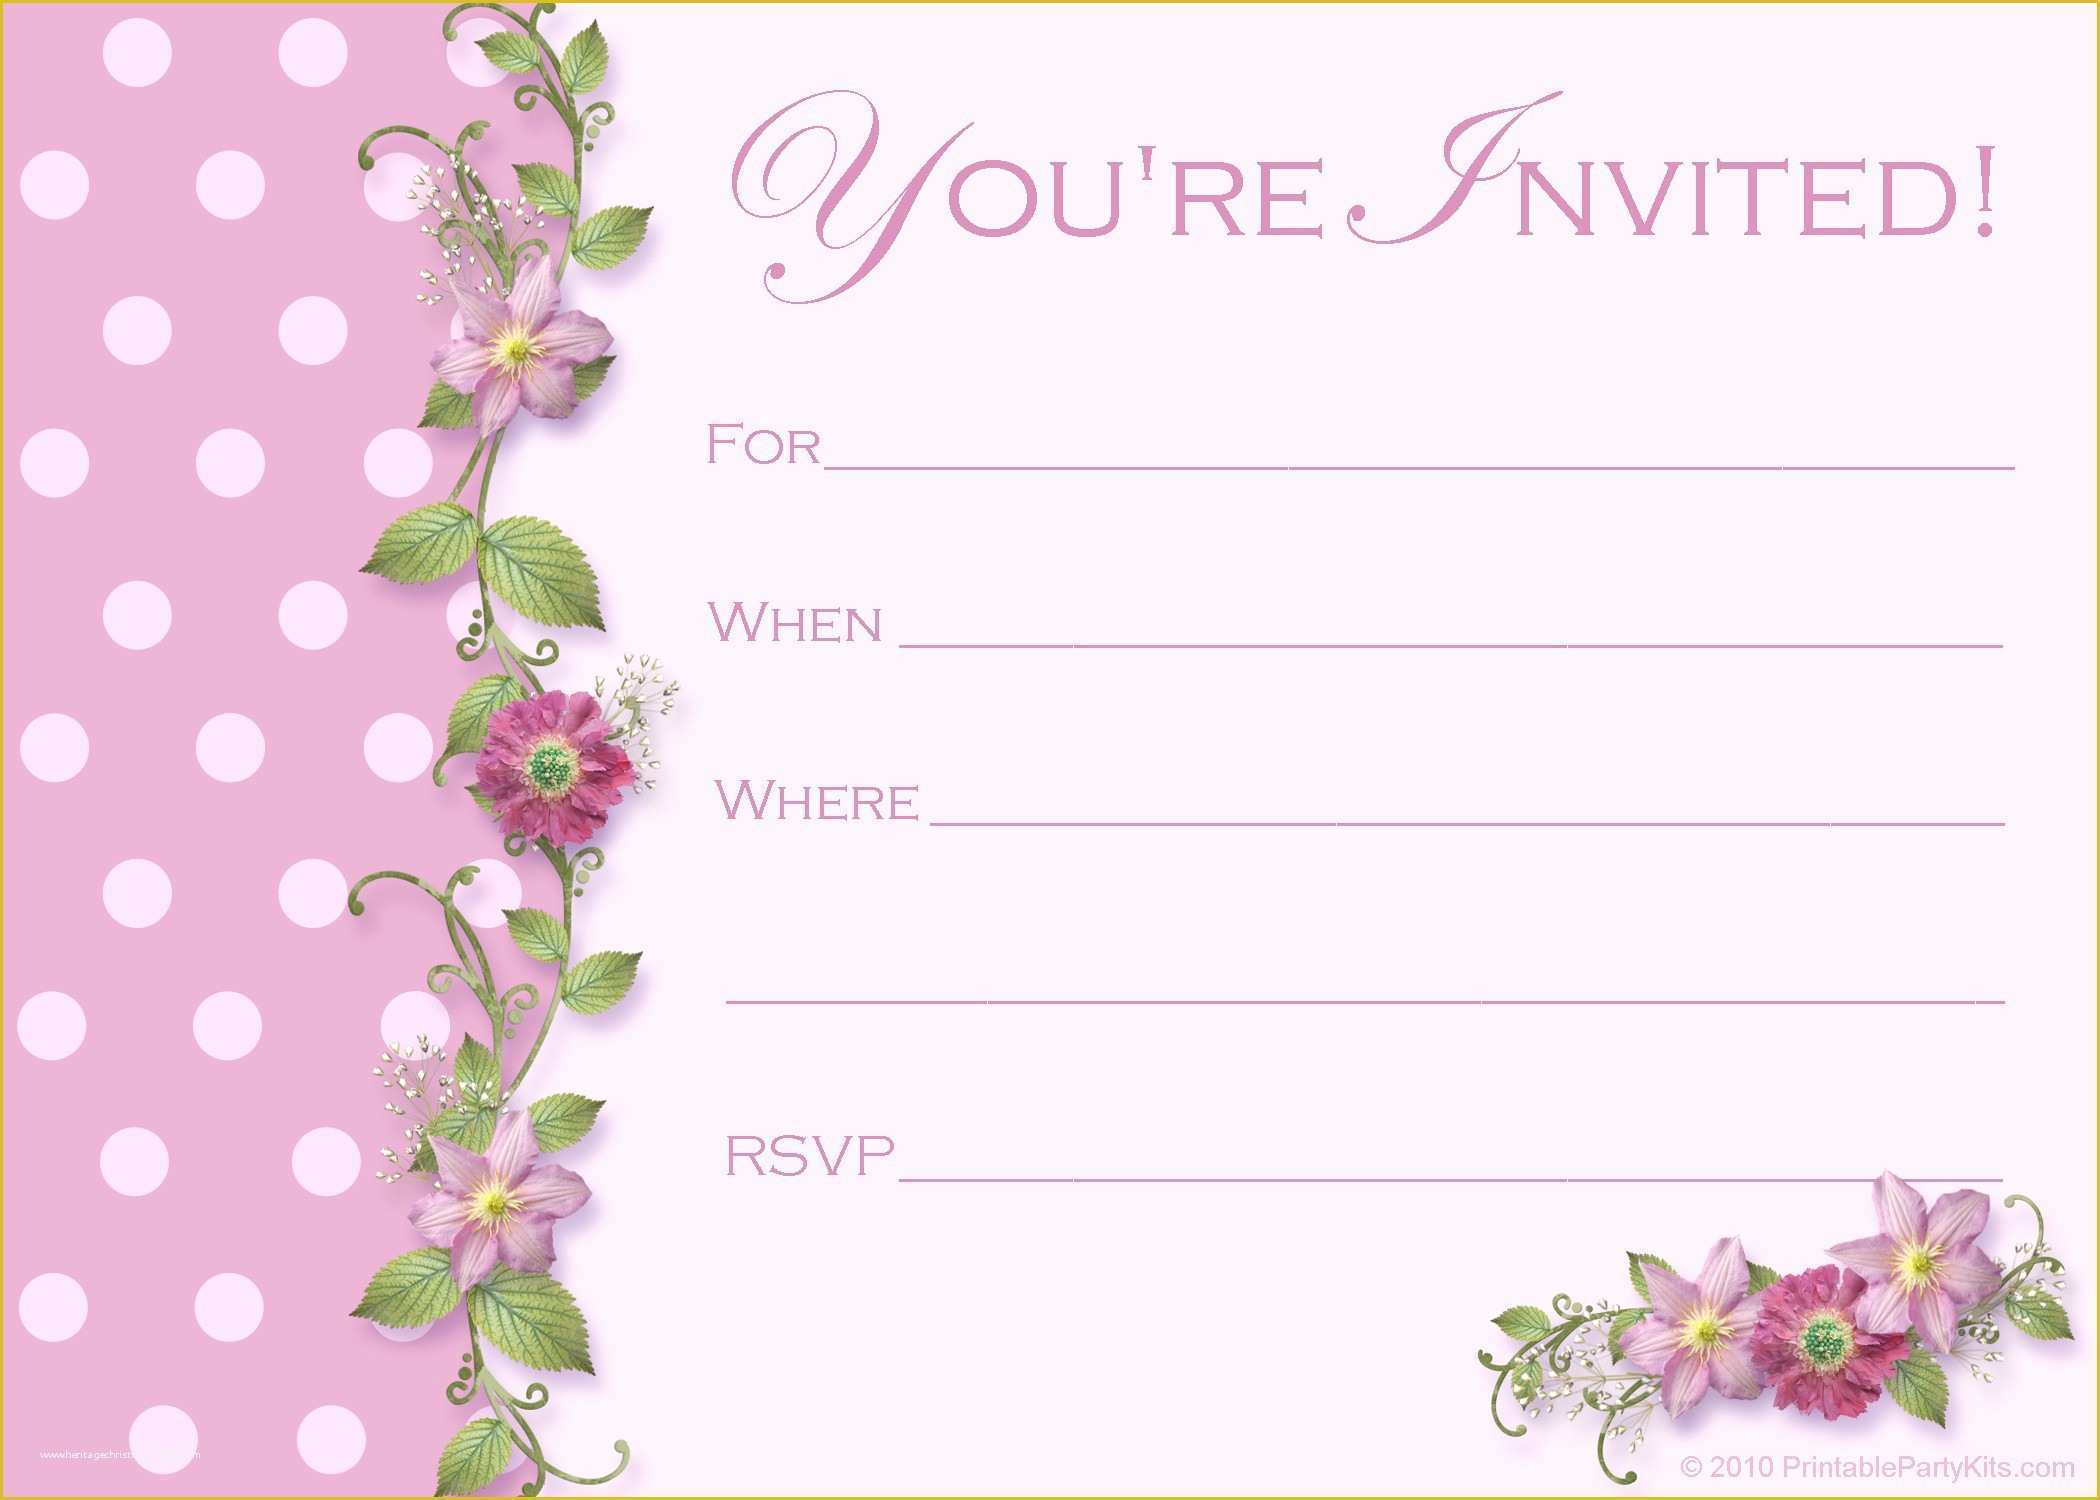 Dinner Party Invitation Templates Free Download Of Free Printable Party Invitations Templates